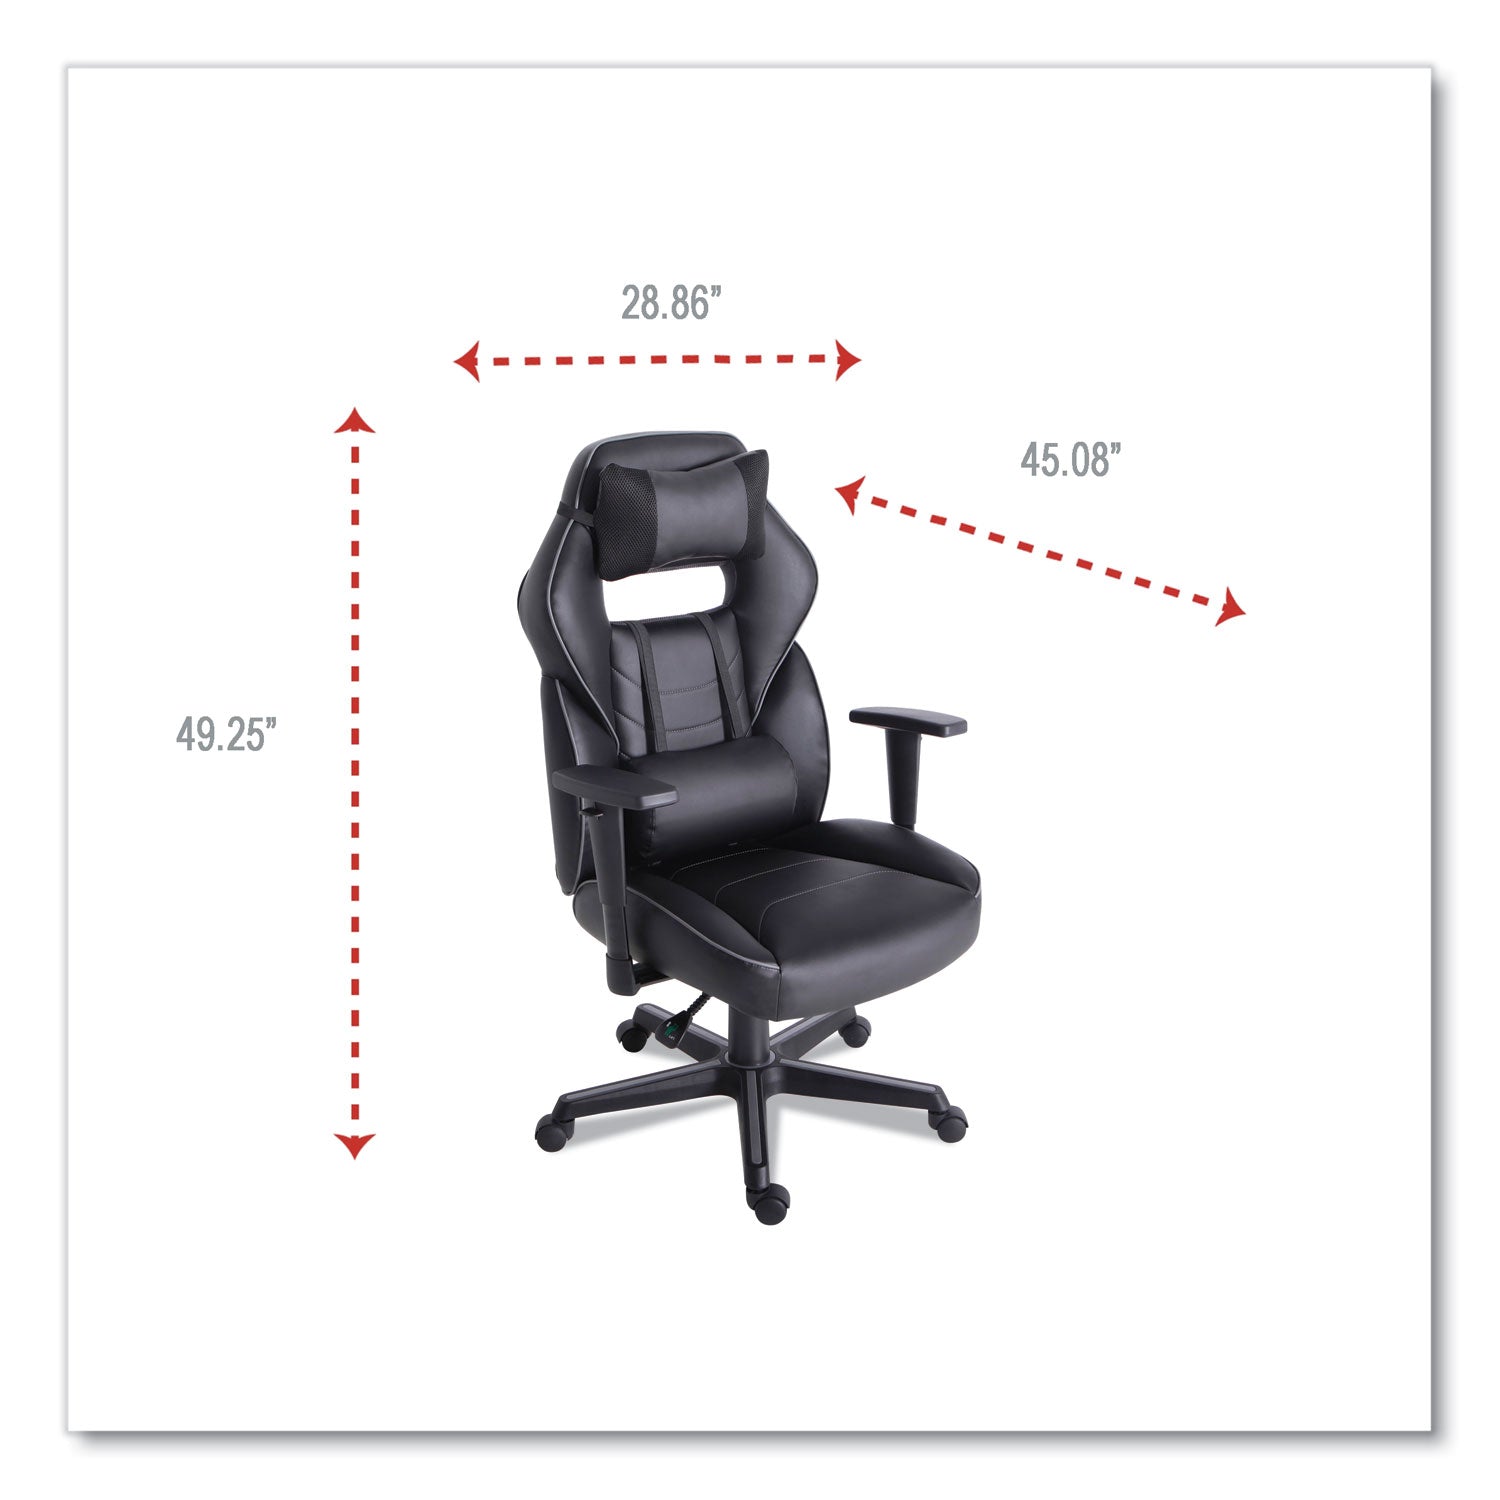 racing-style-ergonomic-gaming-chair-supports-275-lb-1591-to-198-seat-height-black-gray-trim-seat-back-black-gray-base_alegm4146 - 3